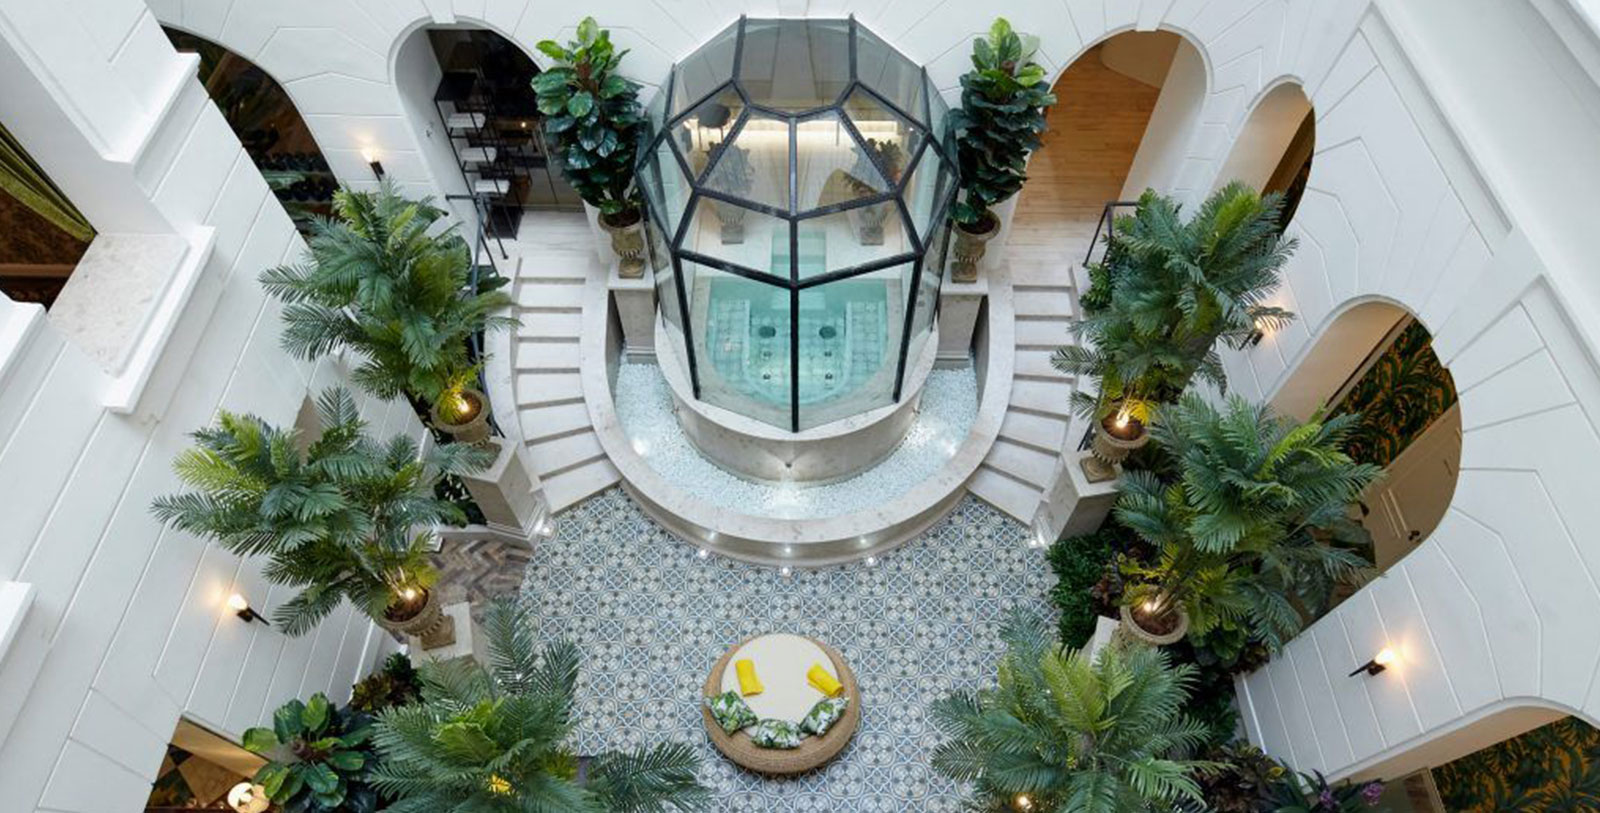 Experience a rejuvenating day of pampering at the Secret Garden Spa.